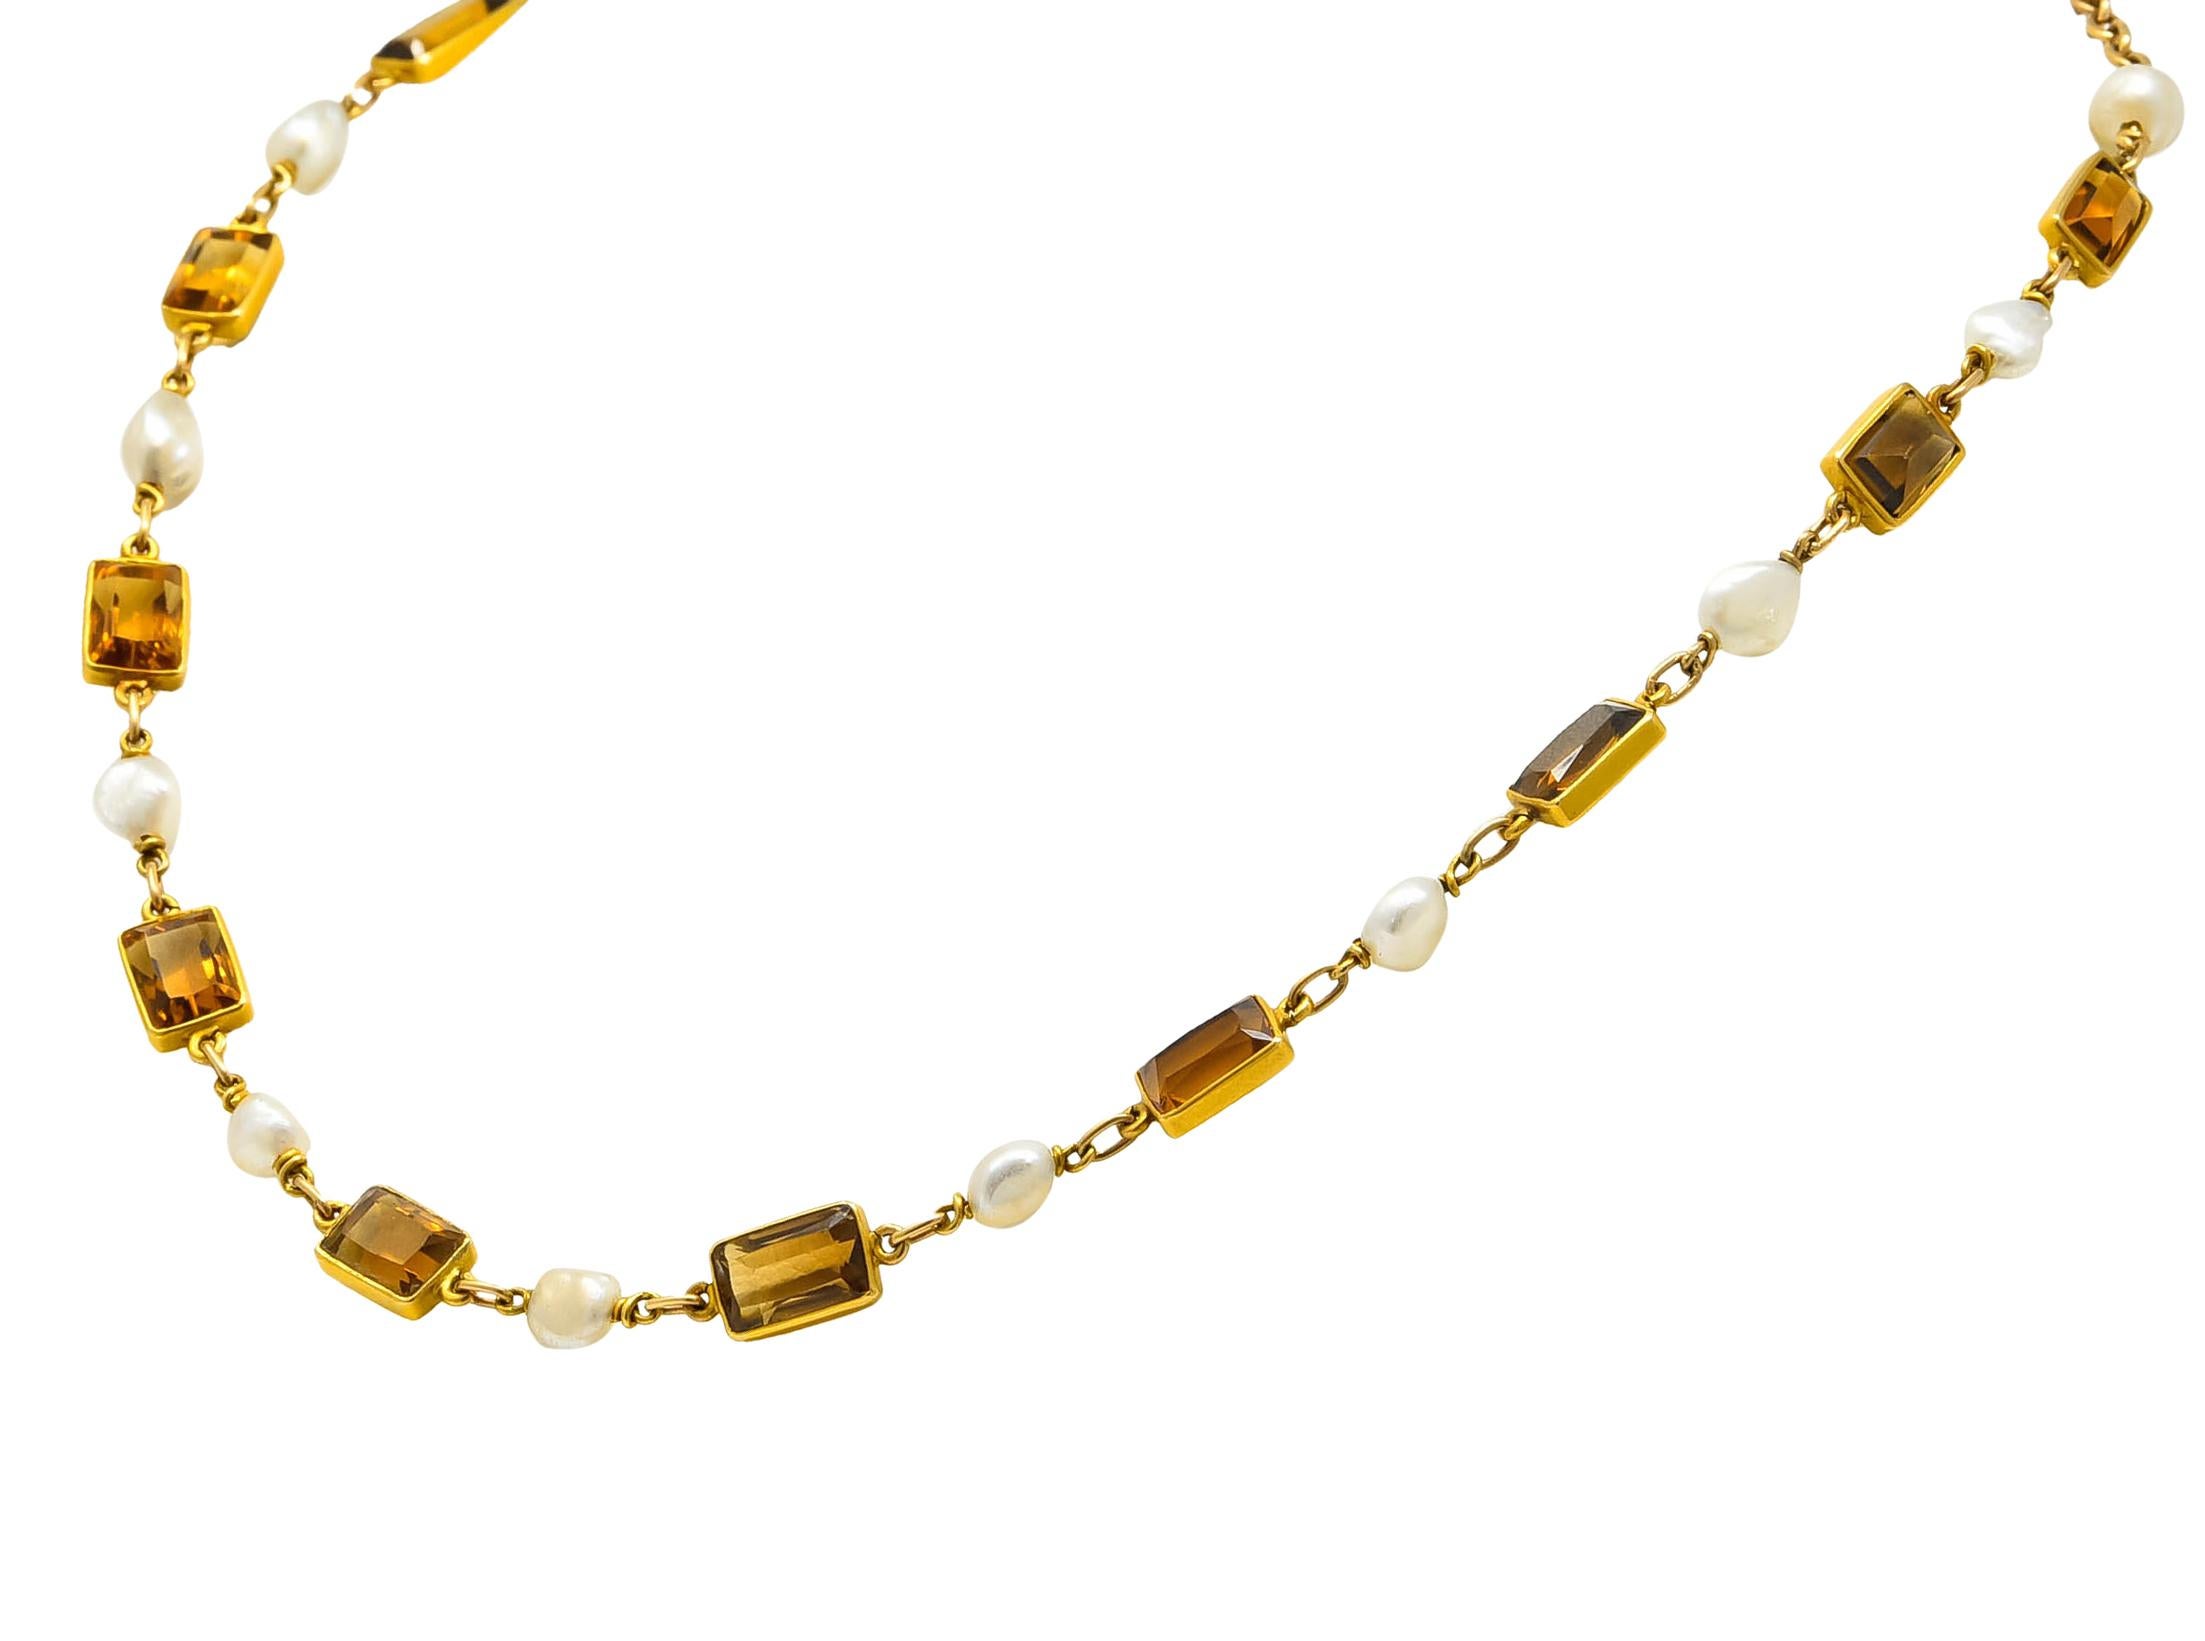 Link style necklace comprised of rectangular cut citrine, bezel set in matte 18 karat gold frames, weighing approximately 15.00 carats total, transparent and a smoked honey color

Alternating with natural pearls measuring approximately 5.5 to 7.0